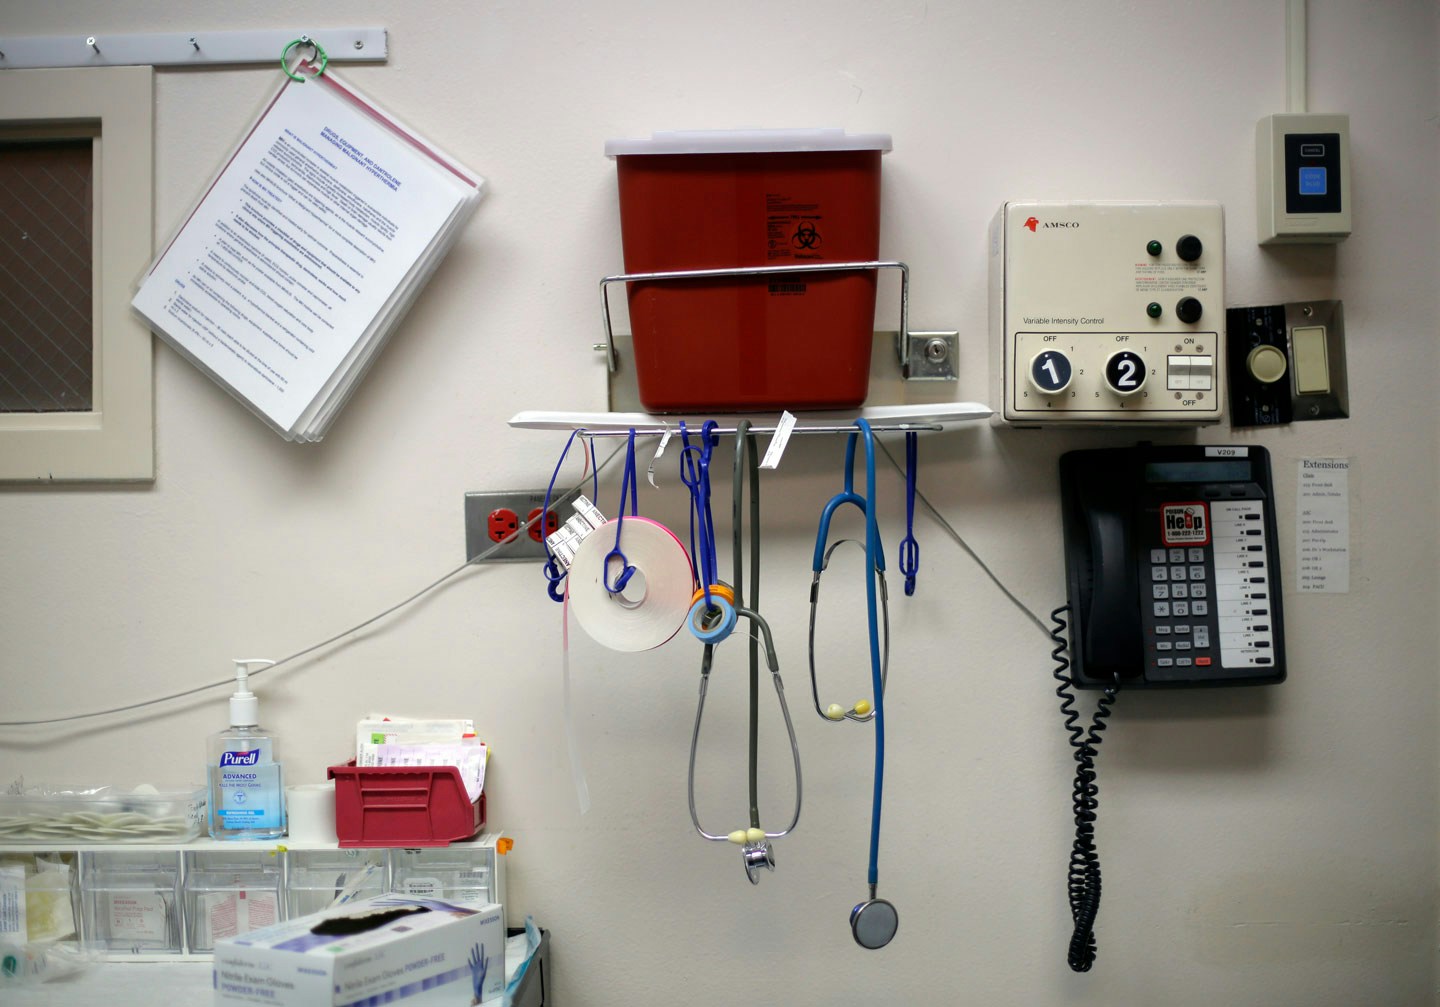 Medical items are seen in an operating room during a tour at Whole Woman’s Health of San Antonio, Tuesday, Feb. 9, 2016, in San Antonio.  The Supreme Court will soon hear Whole Woman's Health’s challenge to HB2, Texas legislation that requires all abortion facilities to meet heightened requirements by becoming ambulatory service centers.  (AP Photo/Eric Gay)